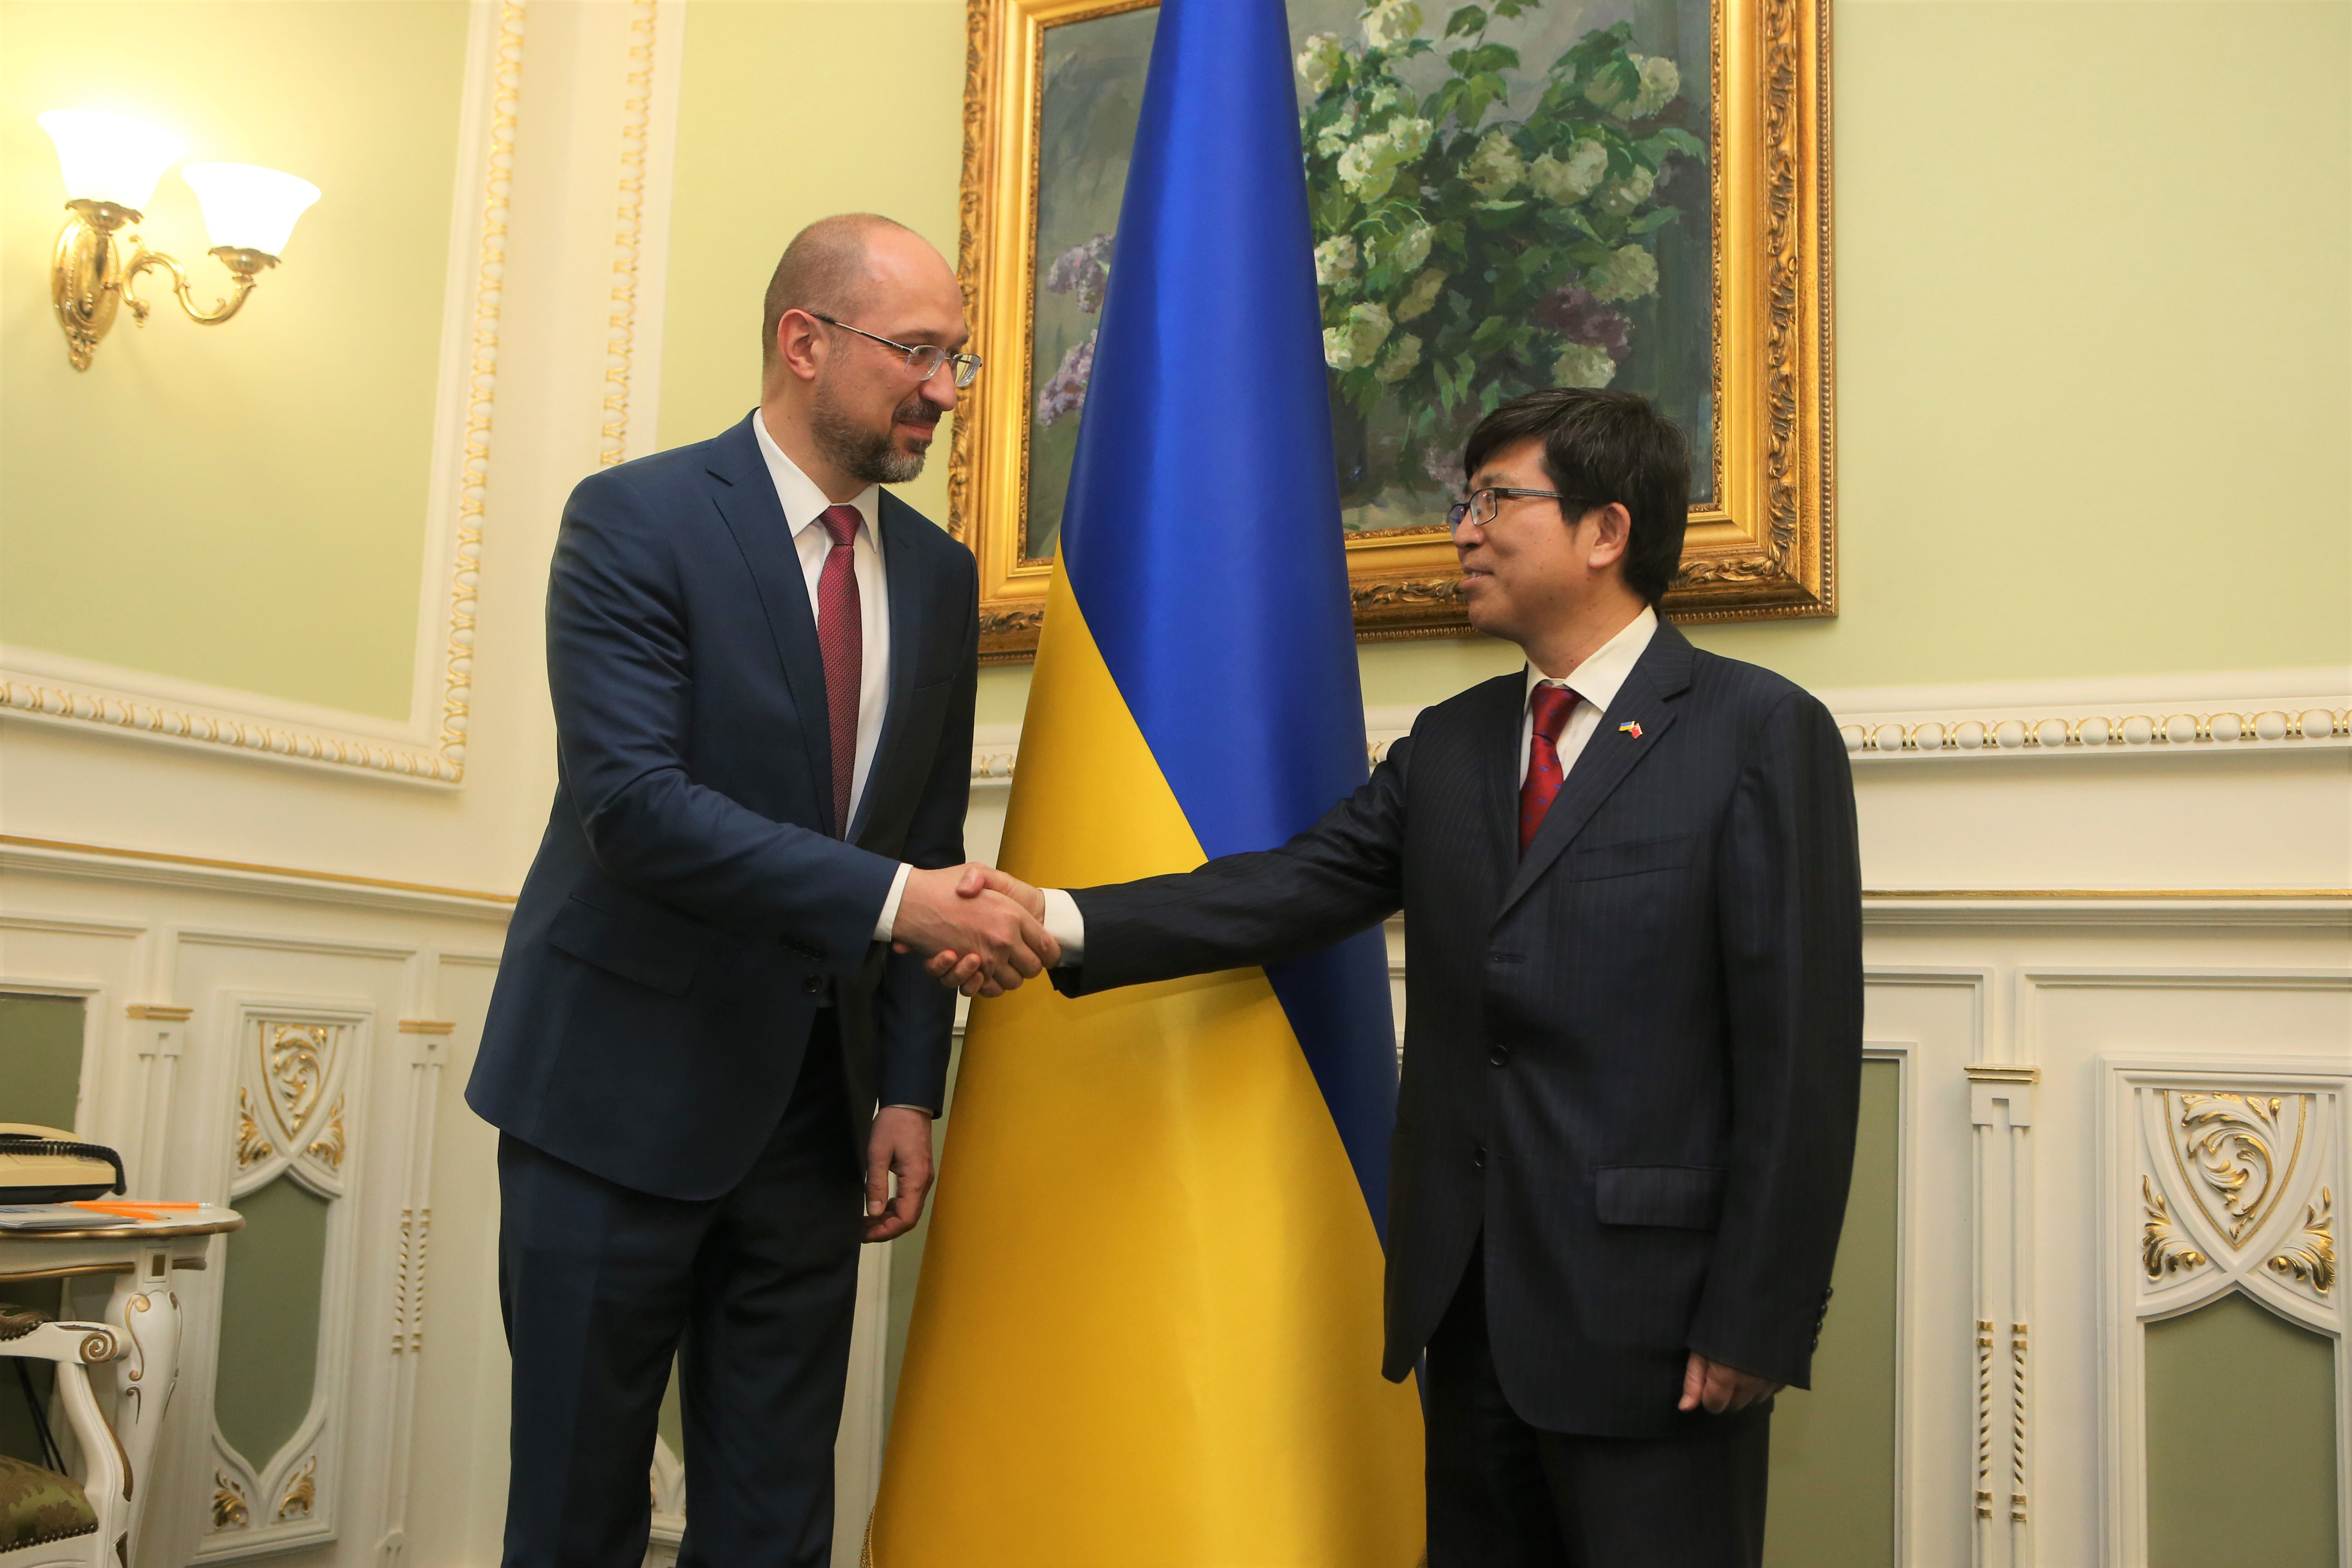 In this file photo, Ukrainian Prime Minister Denys Shmygal, left, shakes hands with Chinese Ambassador to Ukraine Fan Xianrong in Kyiv, Ukraine, on March 18, 2020.